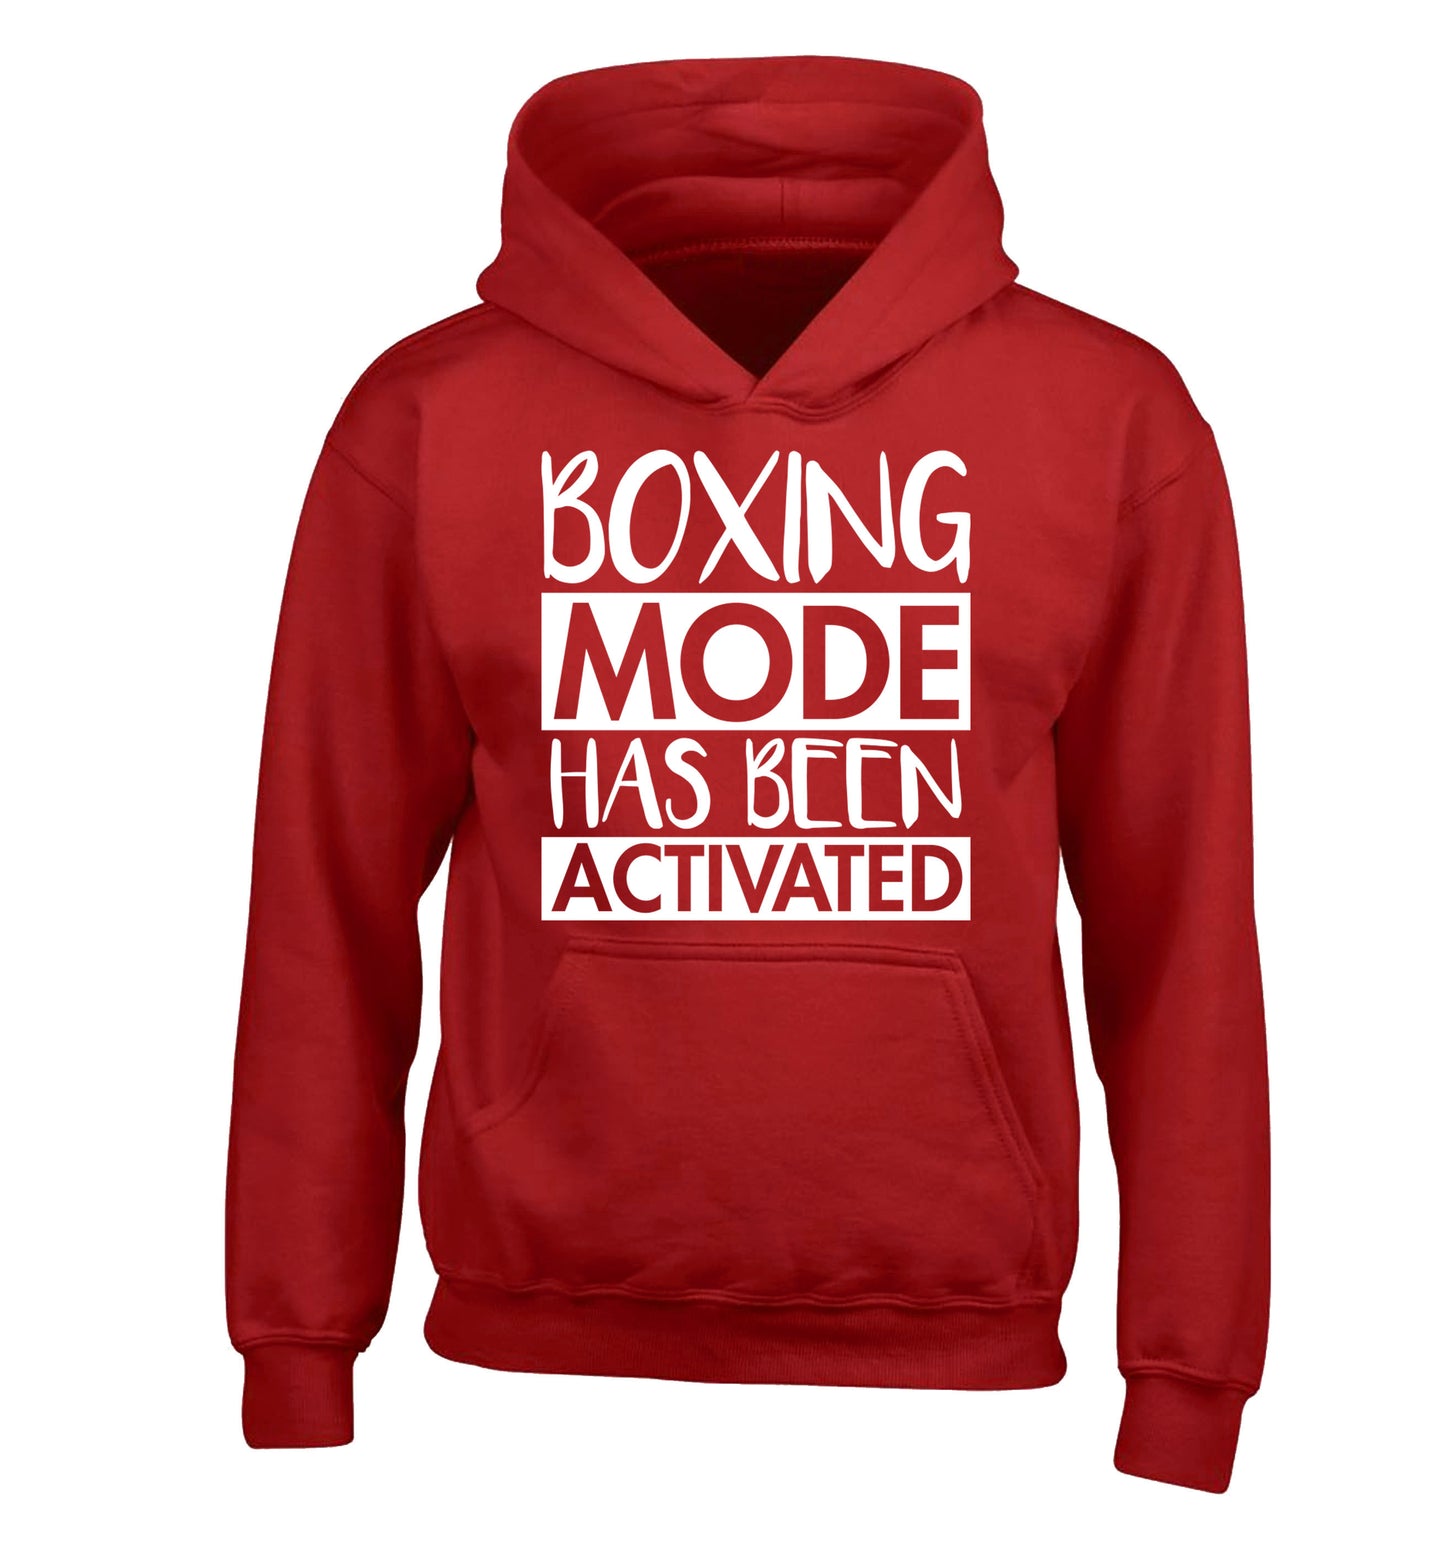 Boxing mode activated children's red hoodie 12-14 Years